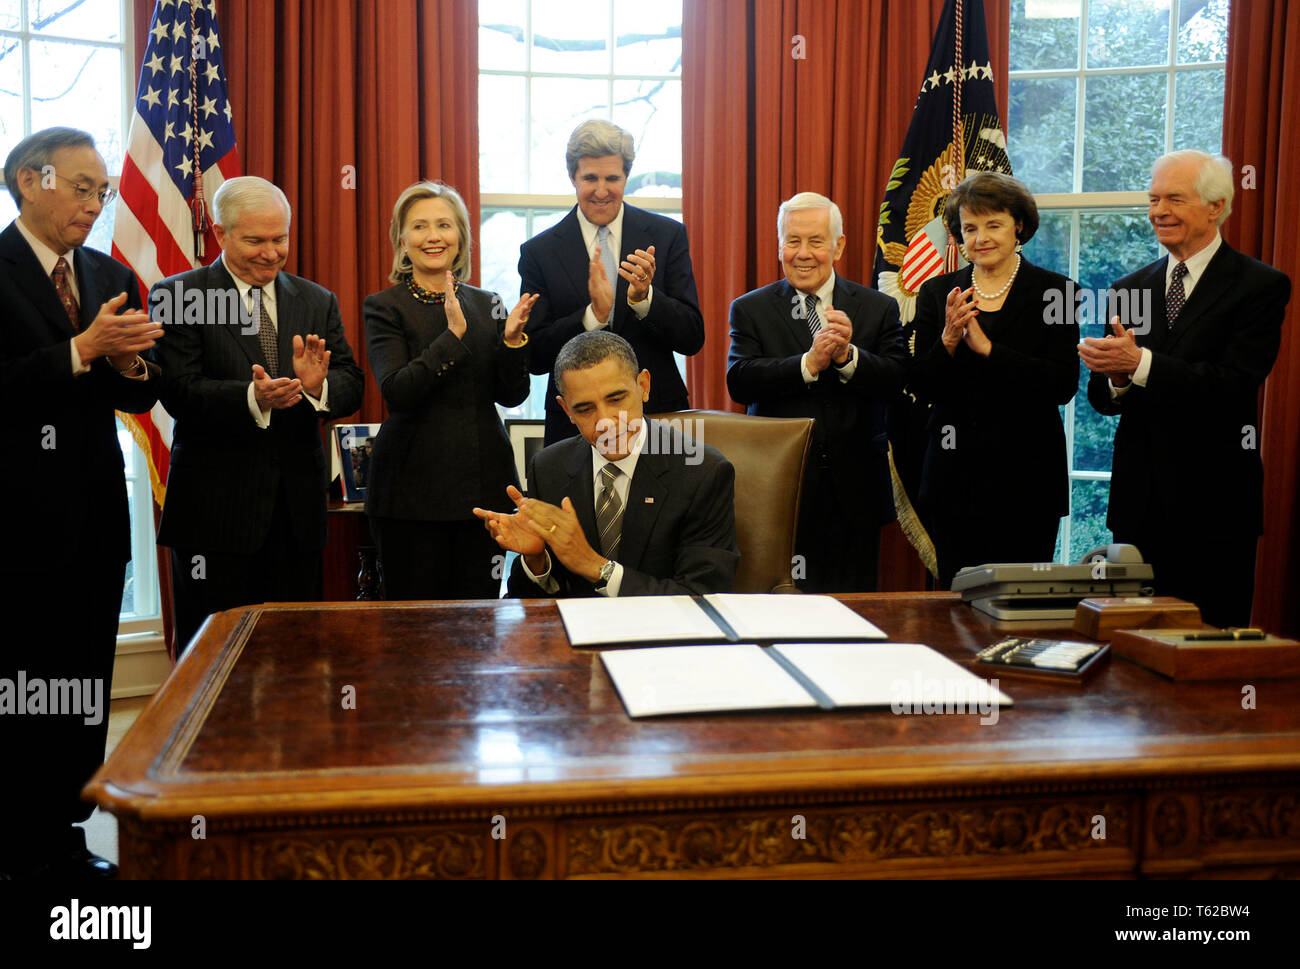 ***FILE PHOTO*** Former Senator Richard Lugar Has Passed Away. United States President Barack Obama signs the New START Treaty during a ceremony in the Oval Office of the White House, with, from left, U.S. Secretary of Energy Steven Chu, U.S. Secretary of Defense Robert Gates, U.S. Secretary of State Hillary Rodham Clinton, U.S. Senator John Kerry (Democrat of Massachusetts), U.S. Senator Richard Lugar (Republican of Indiana), U.S. Senator Dianne Feinstein (Democrat of California), U.S. Senator Thad Cochran (Republican of Mississippi). Credit: Leslie E. Kossoff/Pool via CNP /MediaPunch Stock Photo